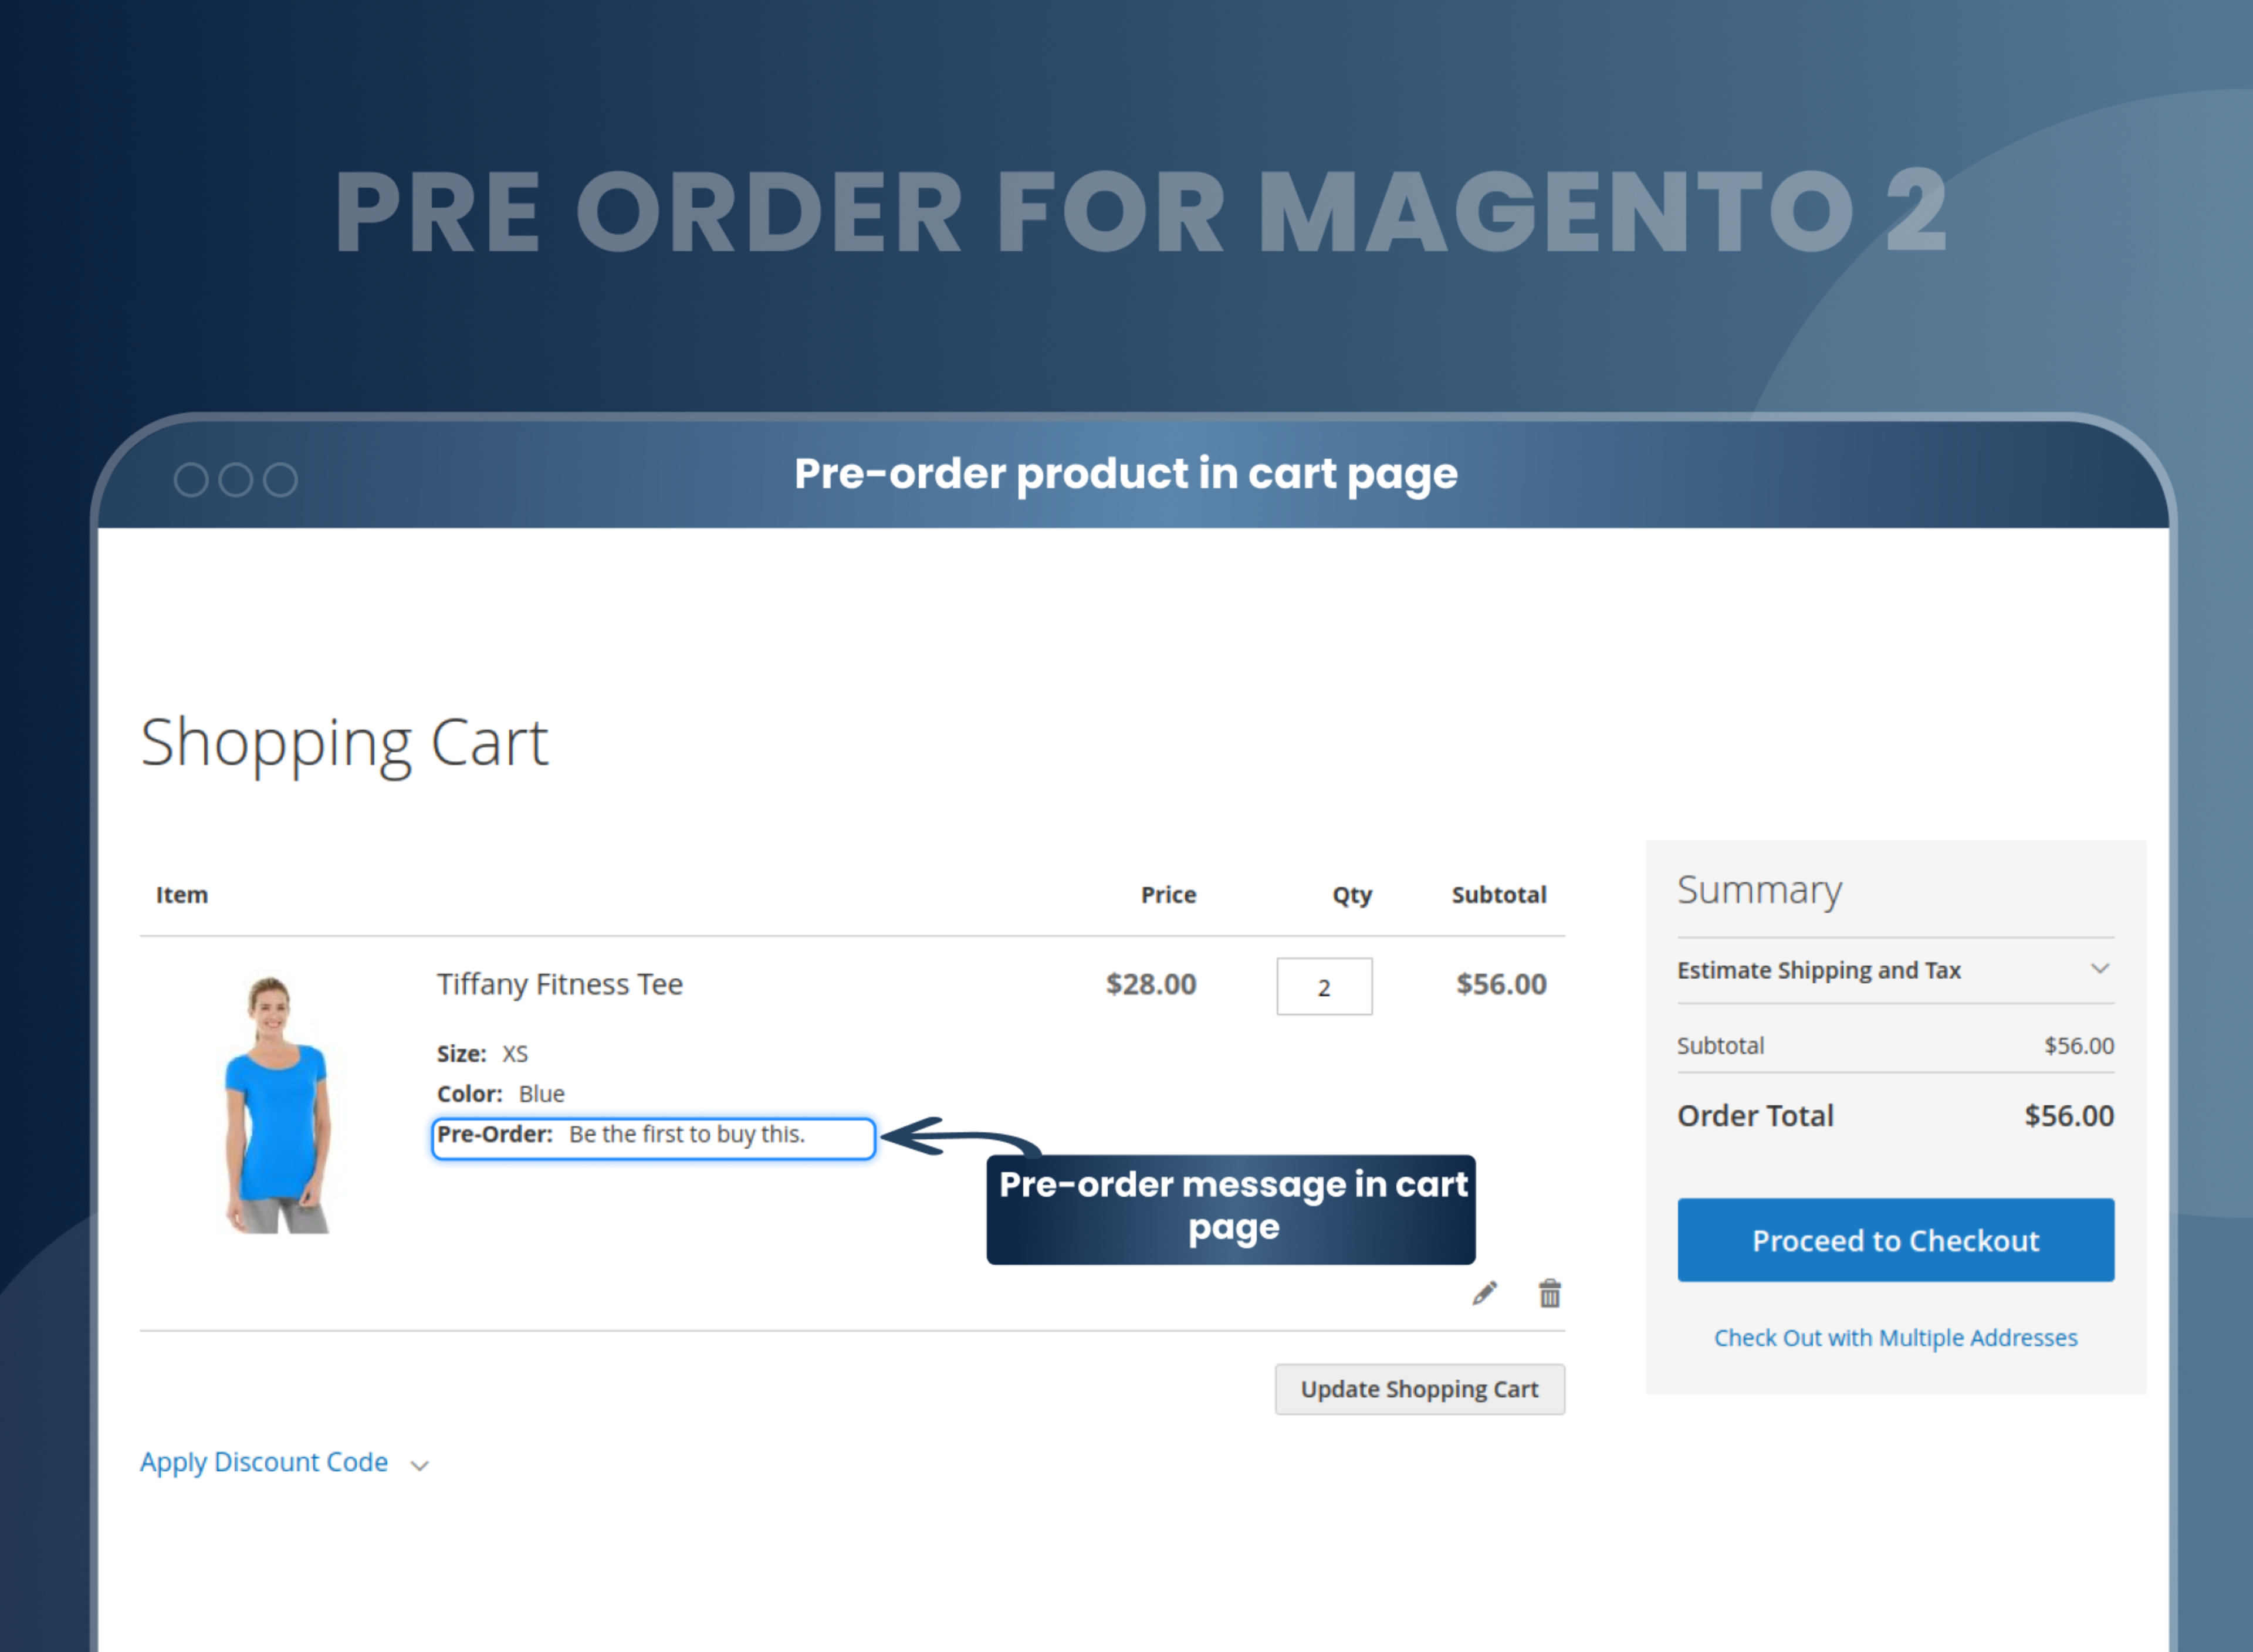 Pre-order product in cart page